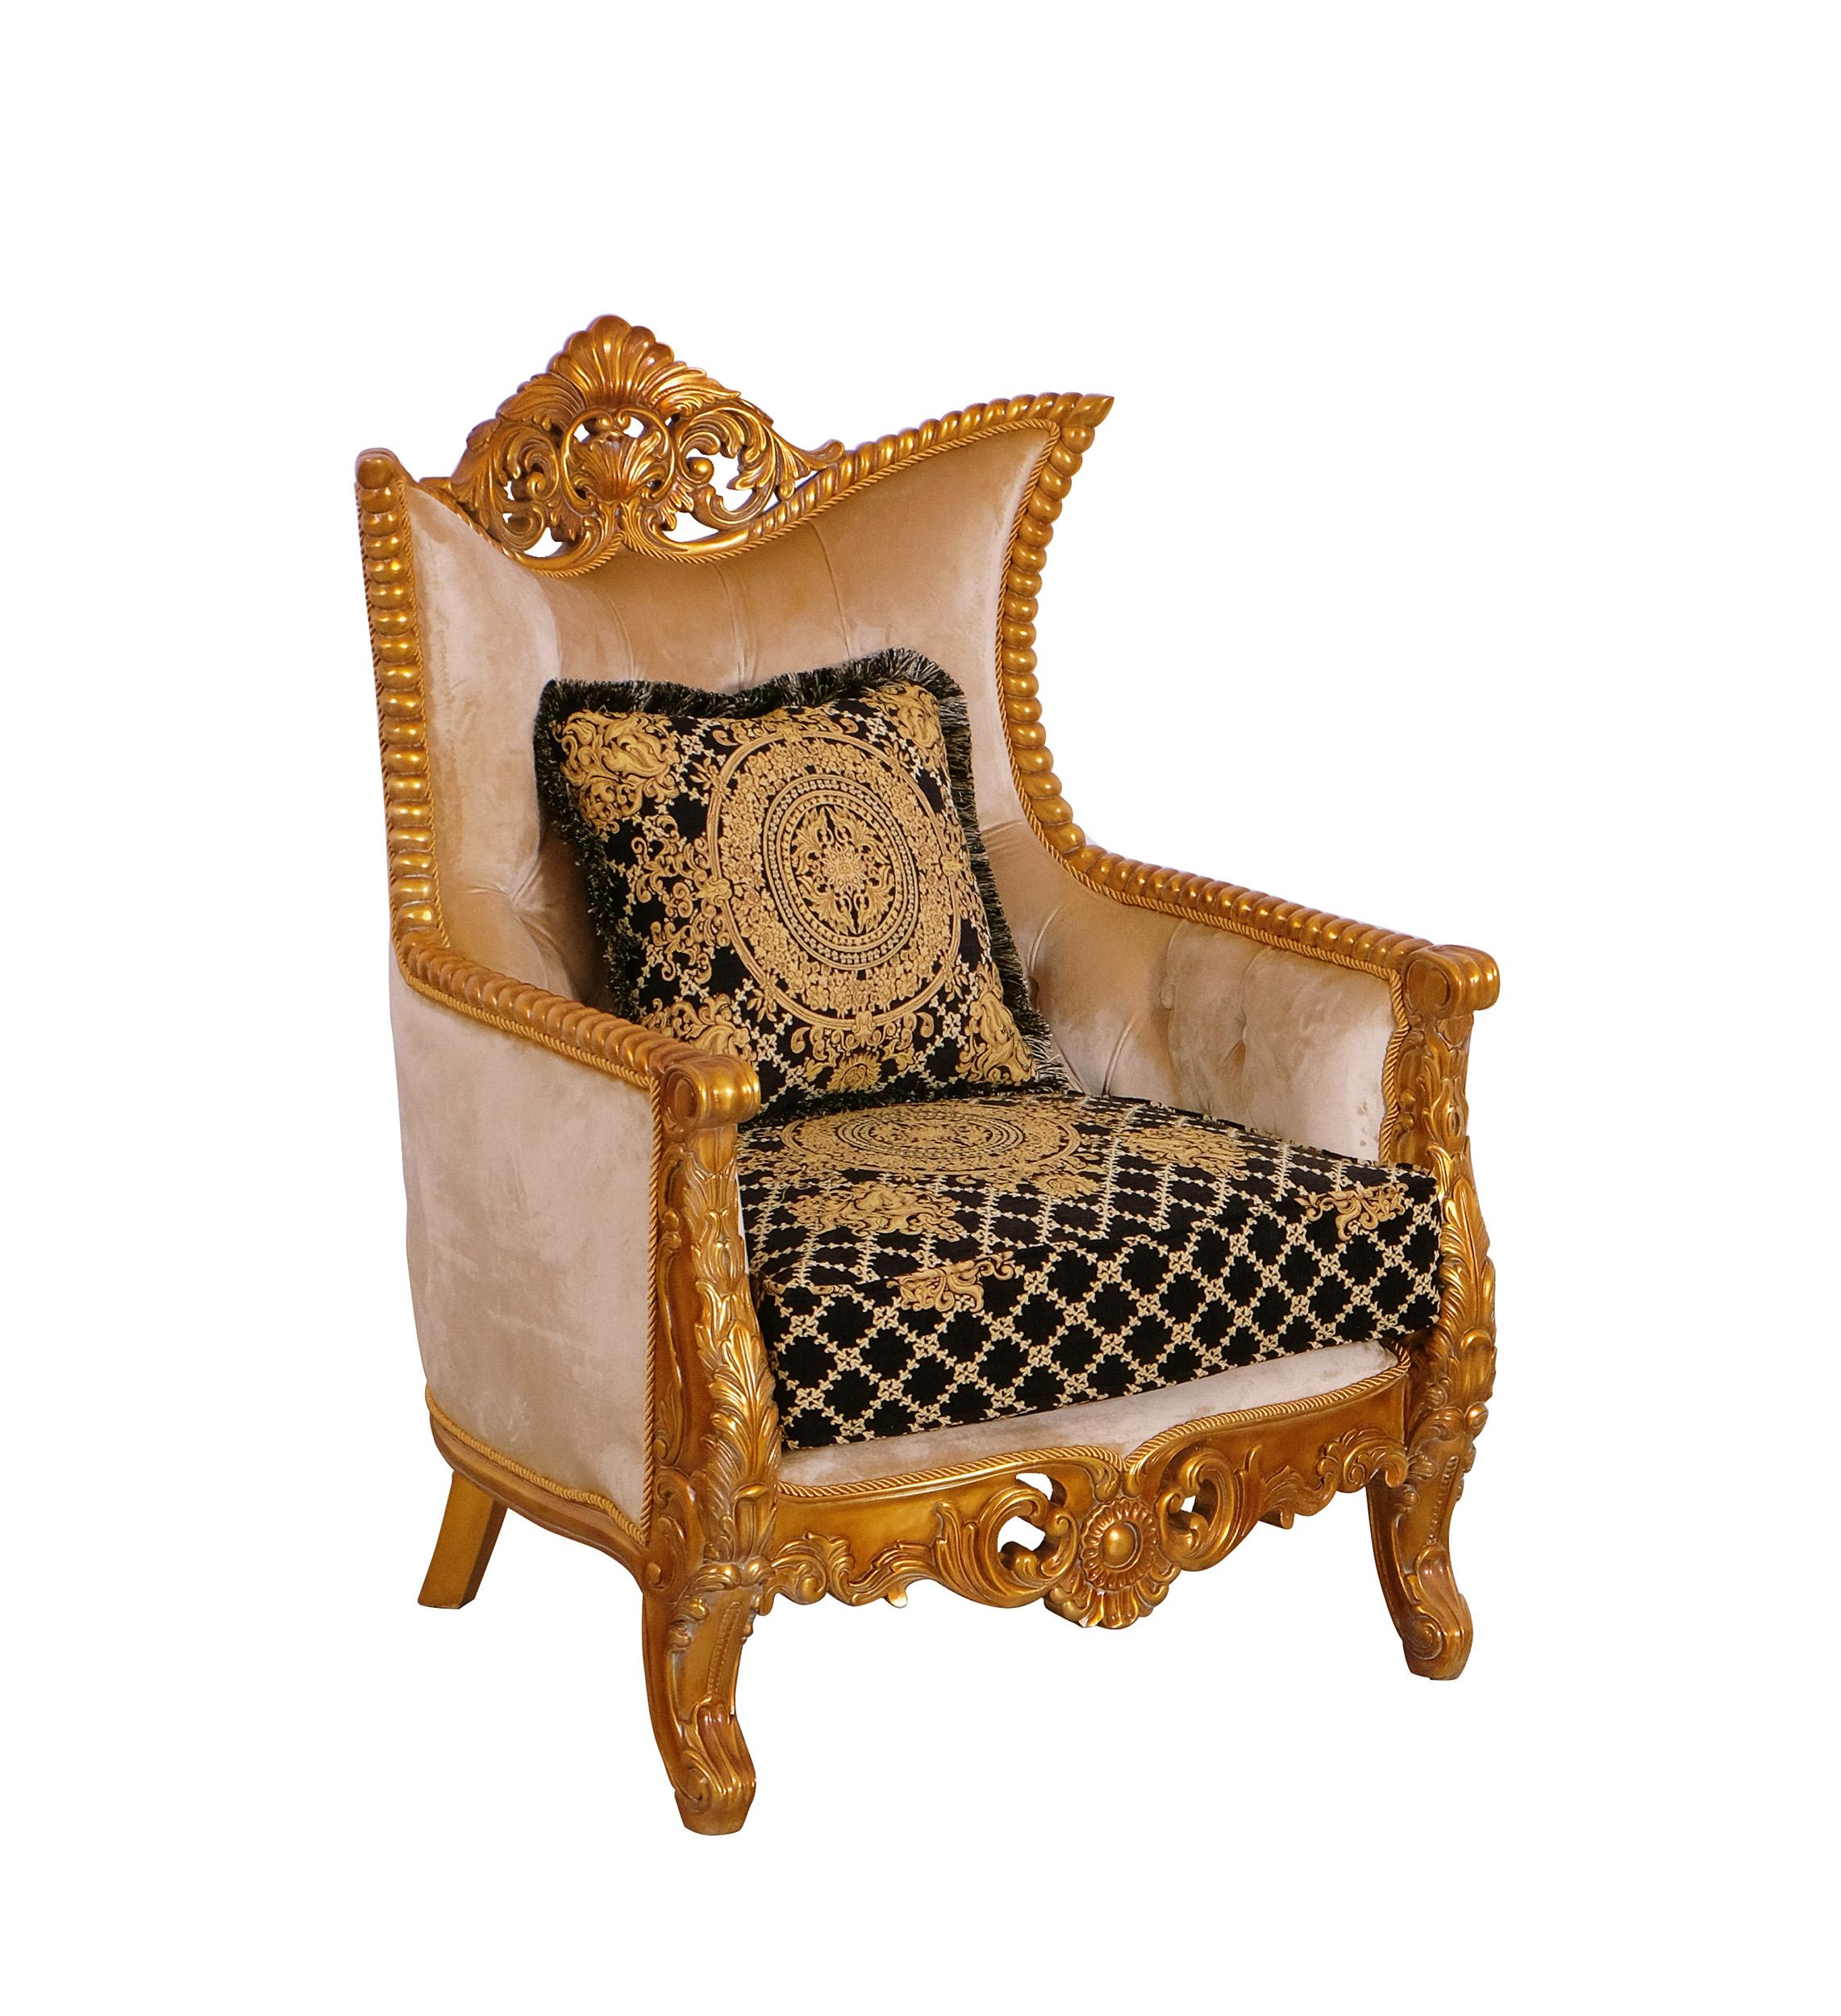 Classic, Traditional Arm Chair MODIGLIANI 31052-C in Gold, Black Fabric